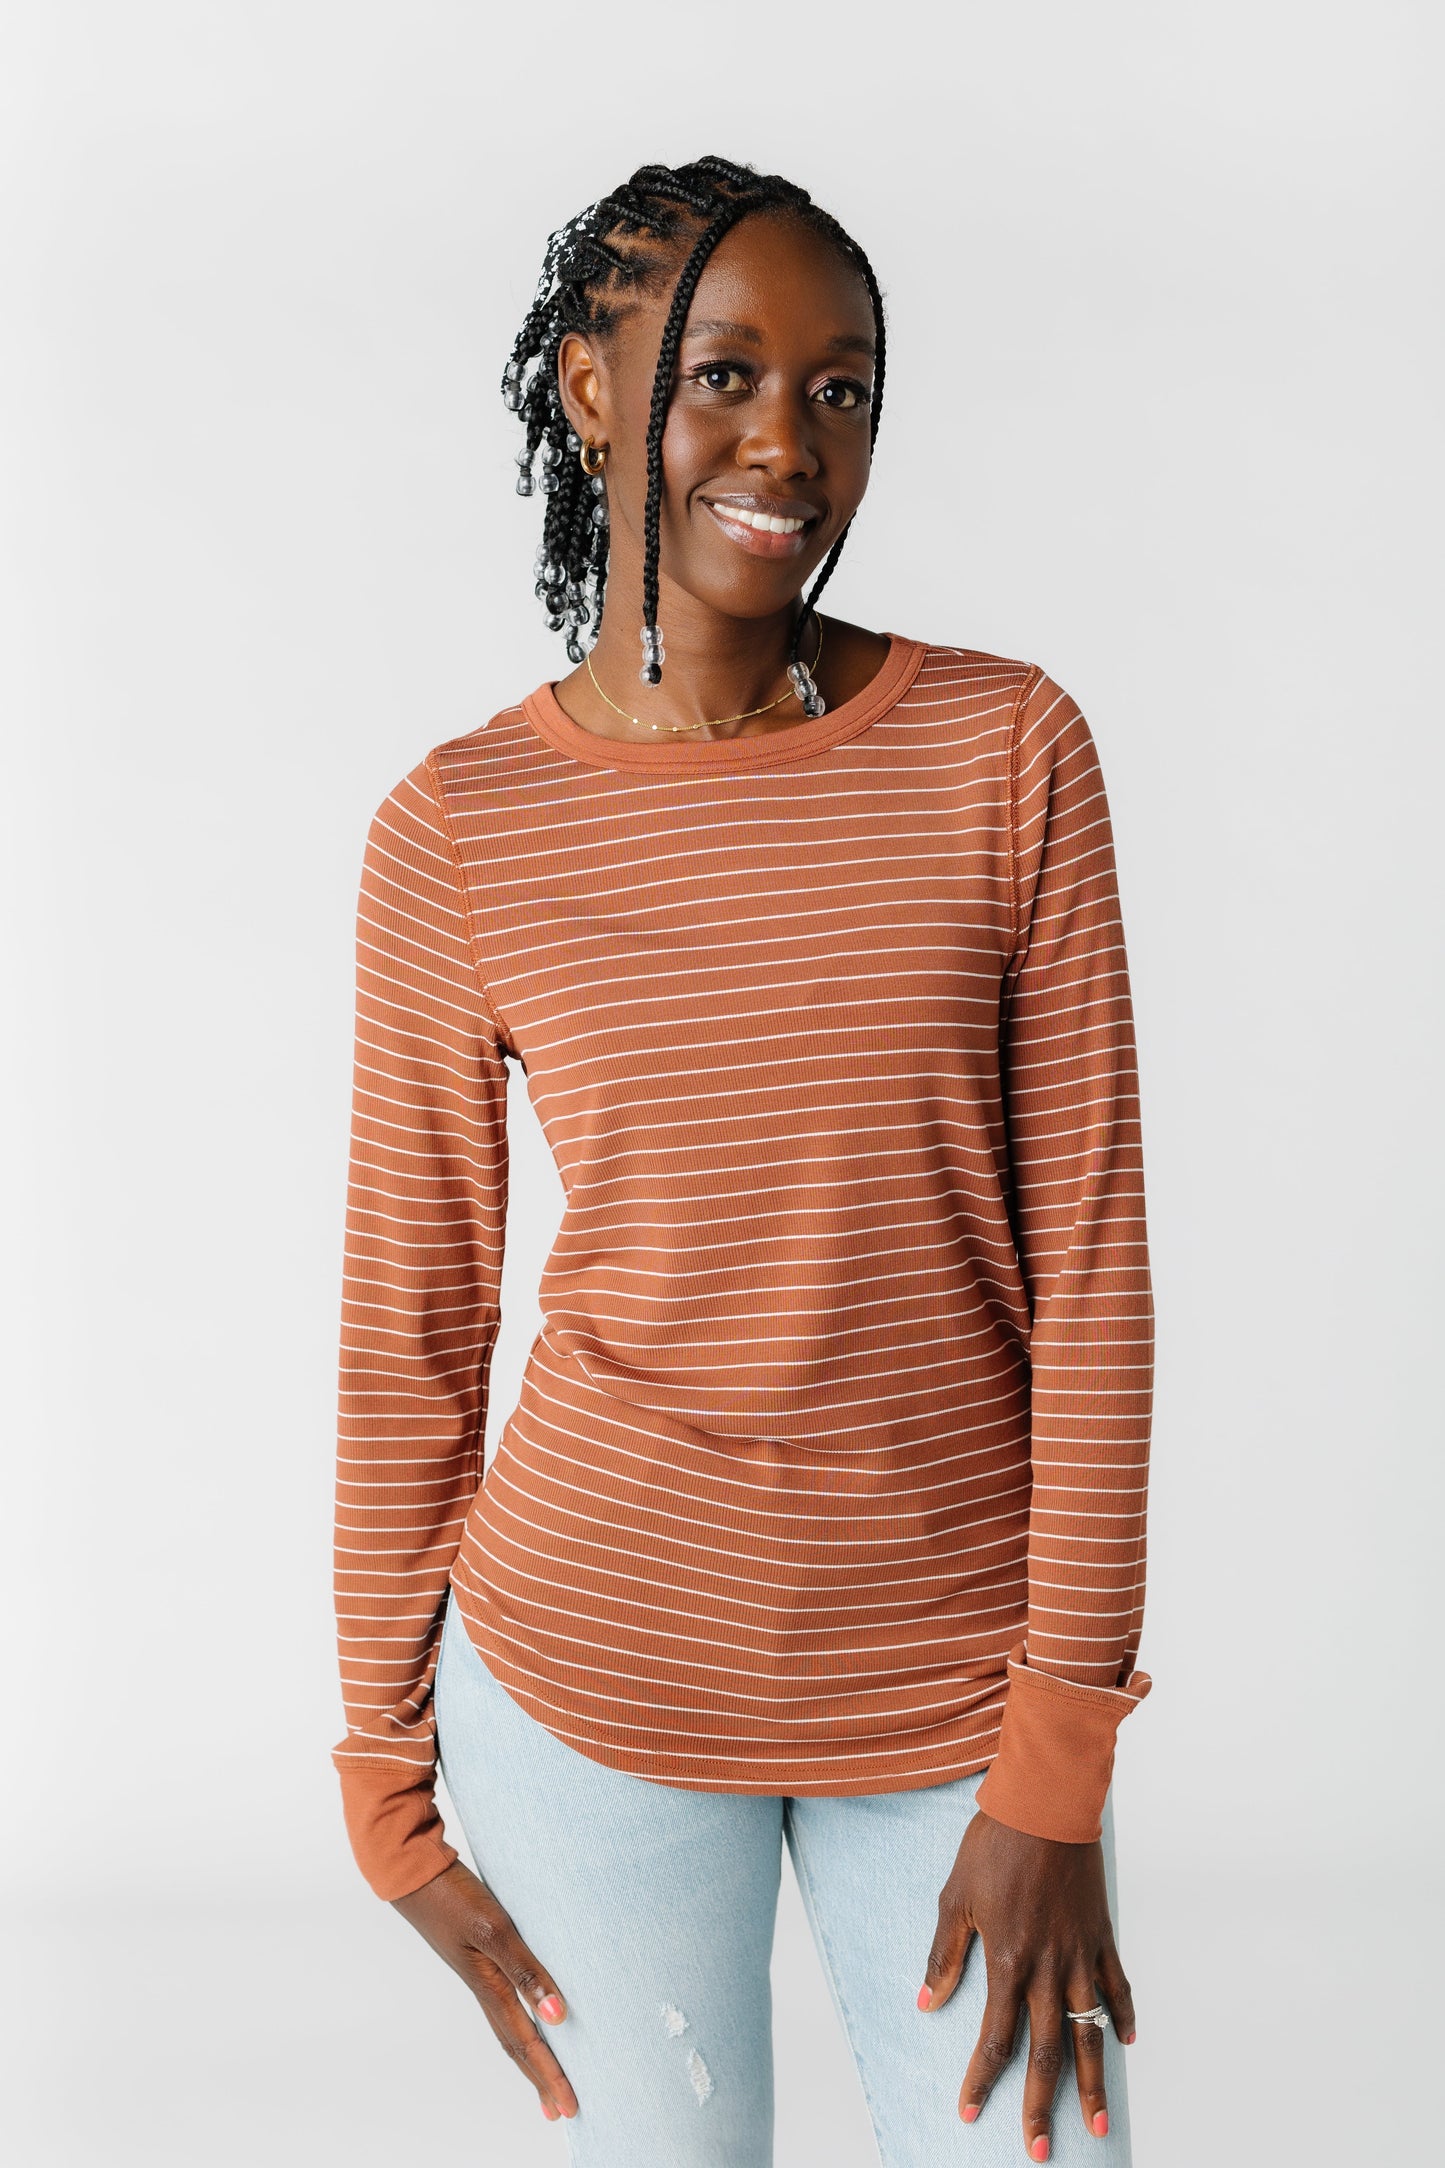 Stacy Top - Rustic Brown Women's Long Sleeve T Thread & Supply Rustic Brown Stripe L 